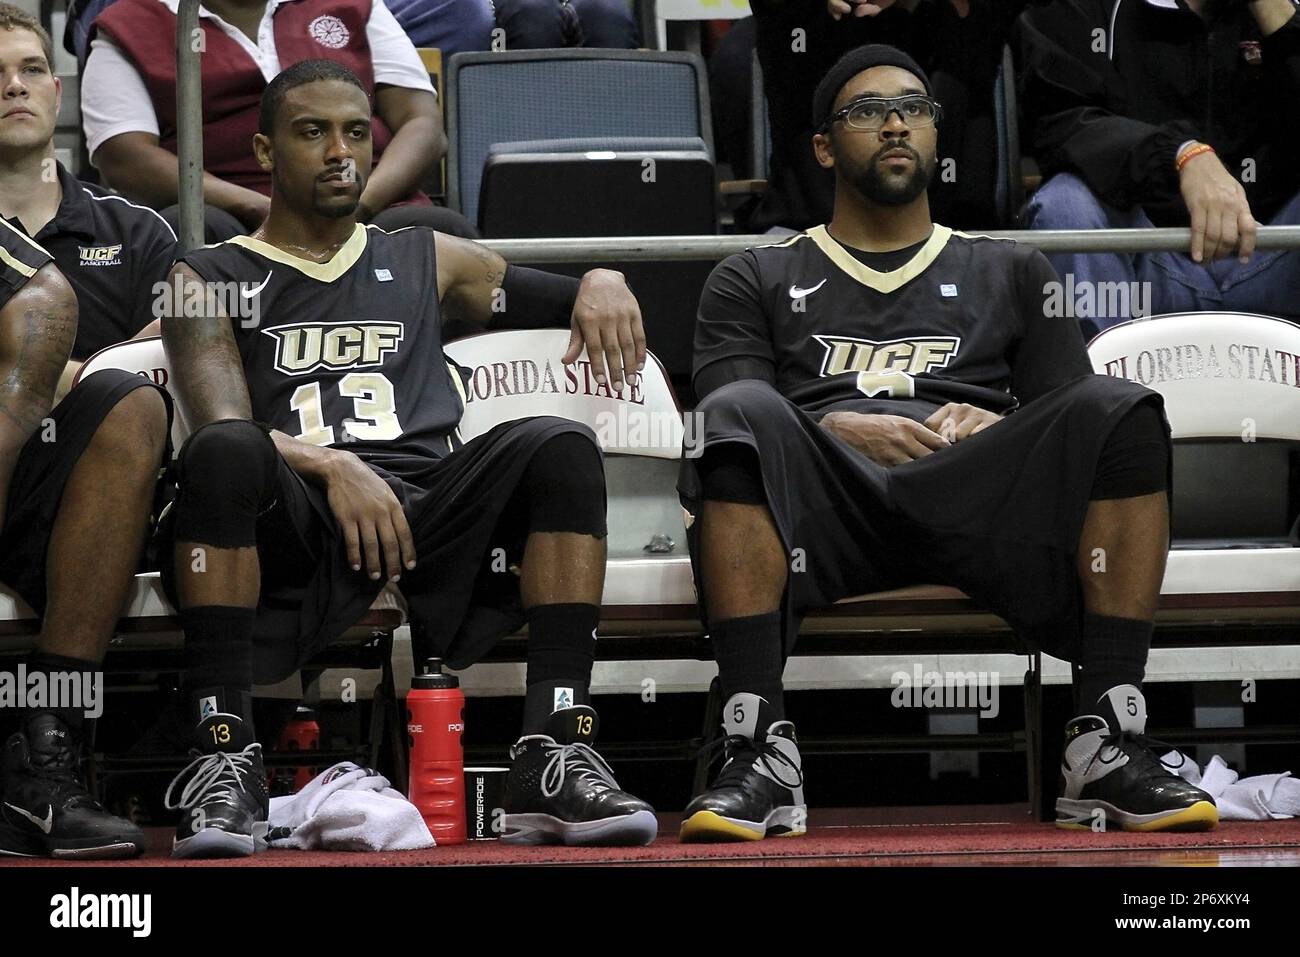 Central Florida Guards Jeffrey Jordan (13) and Marcus Jordan (5) during the  game against Florida State at the Tucker Center on November 14, 2011 in  Tallahassee, Florida. The Jordans are the sons